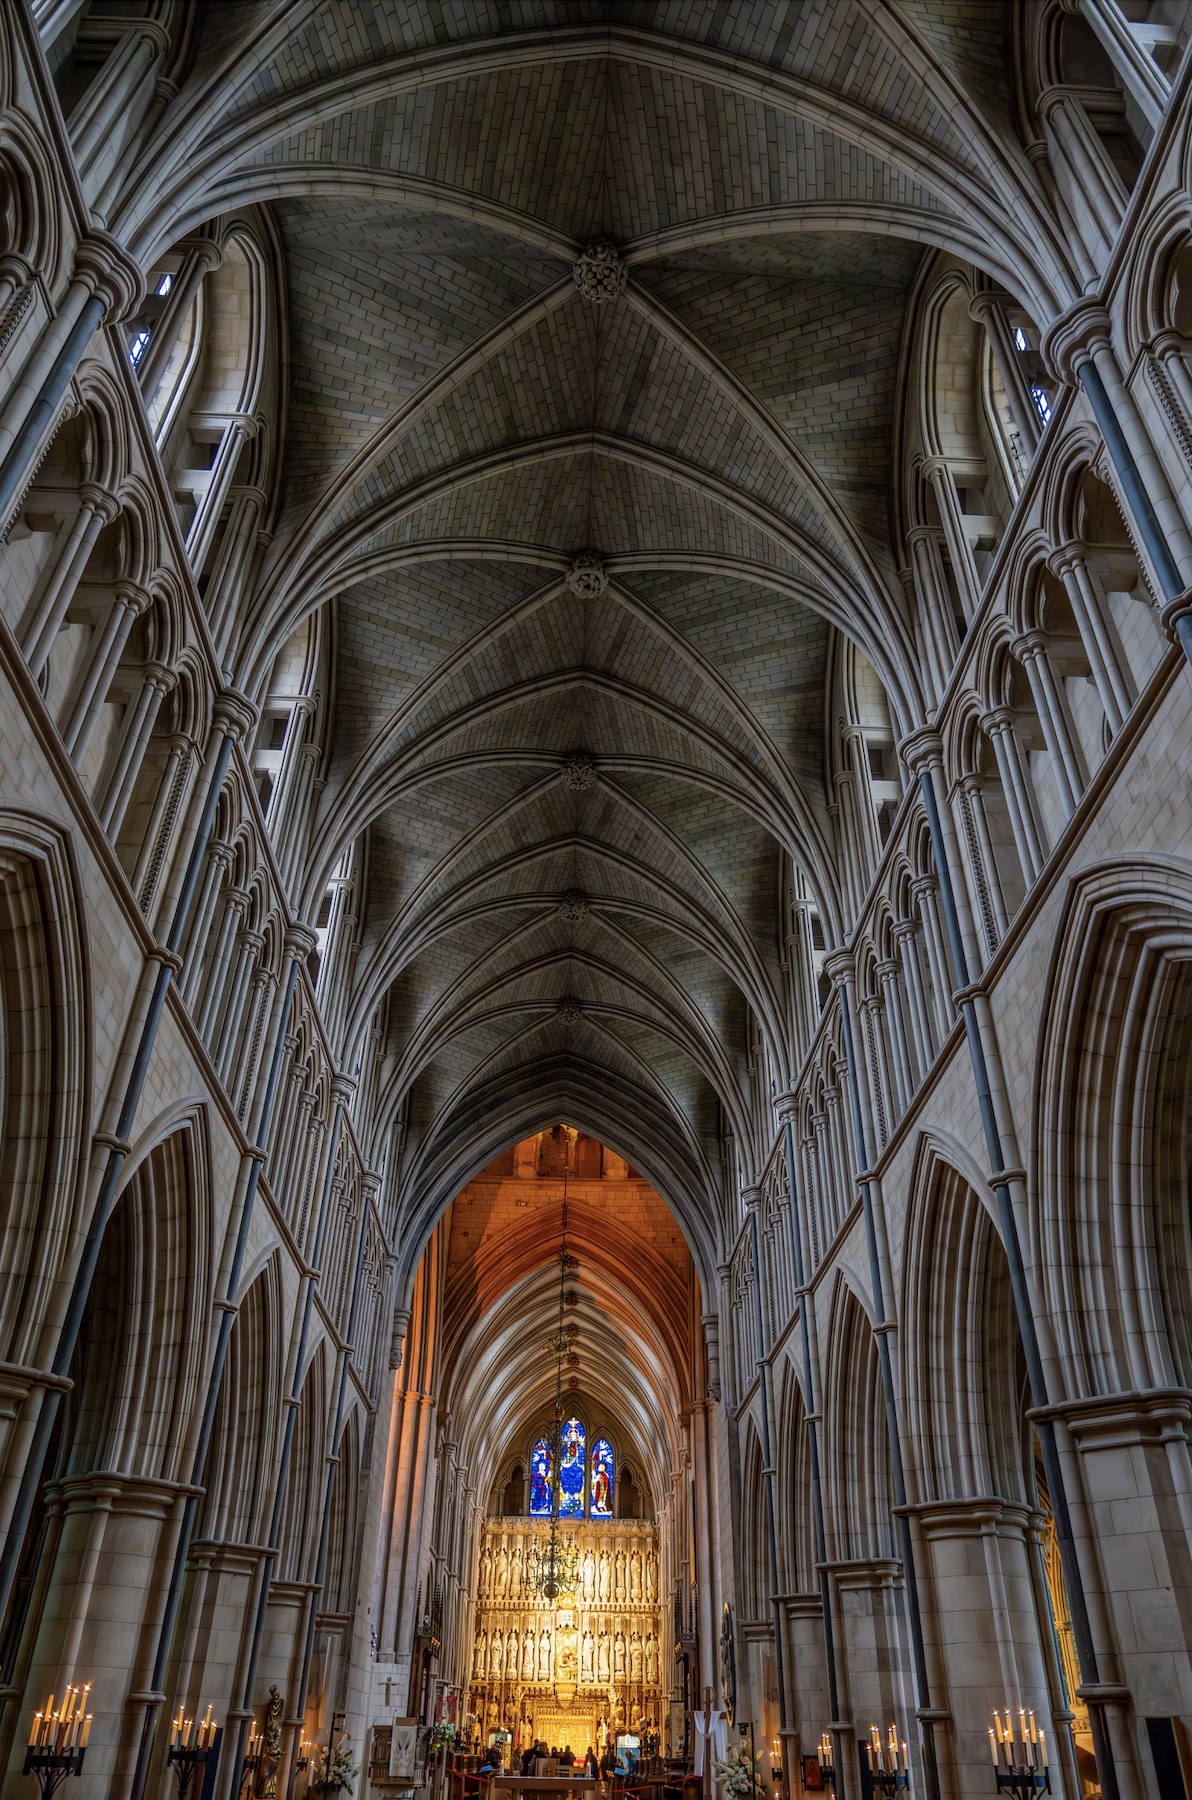 Southwark Cathedral Ceilings - Always Look Up